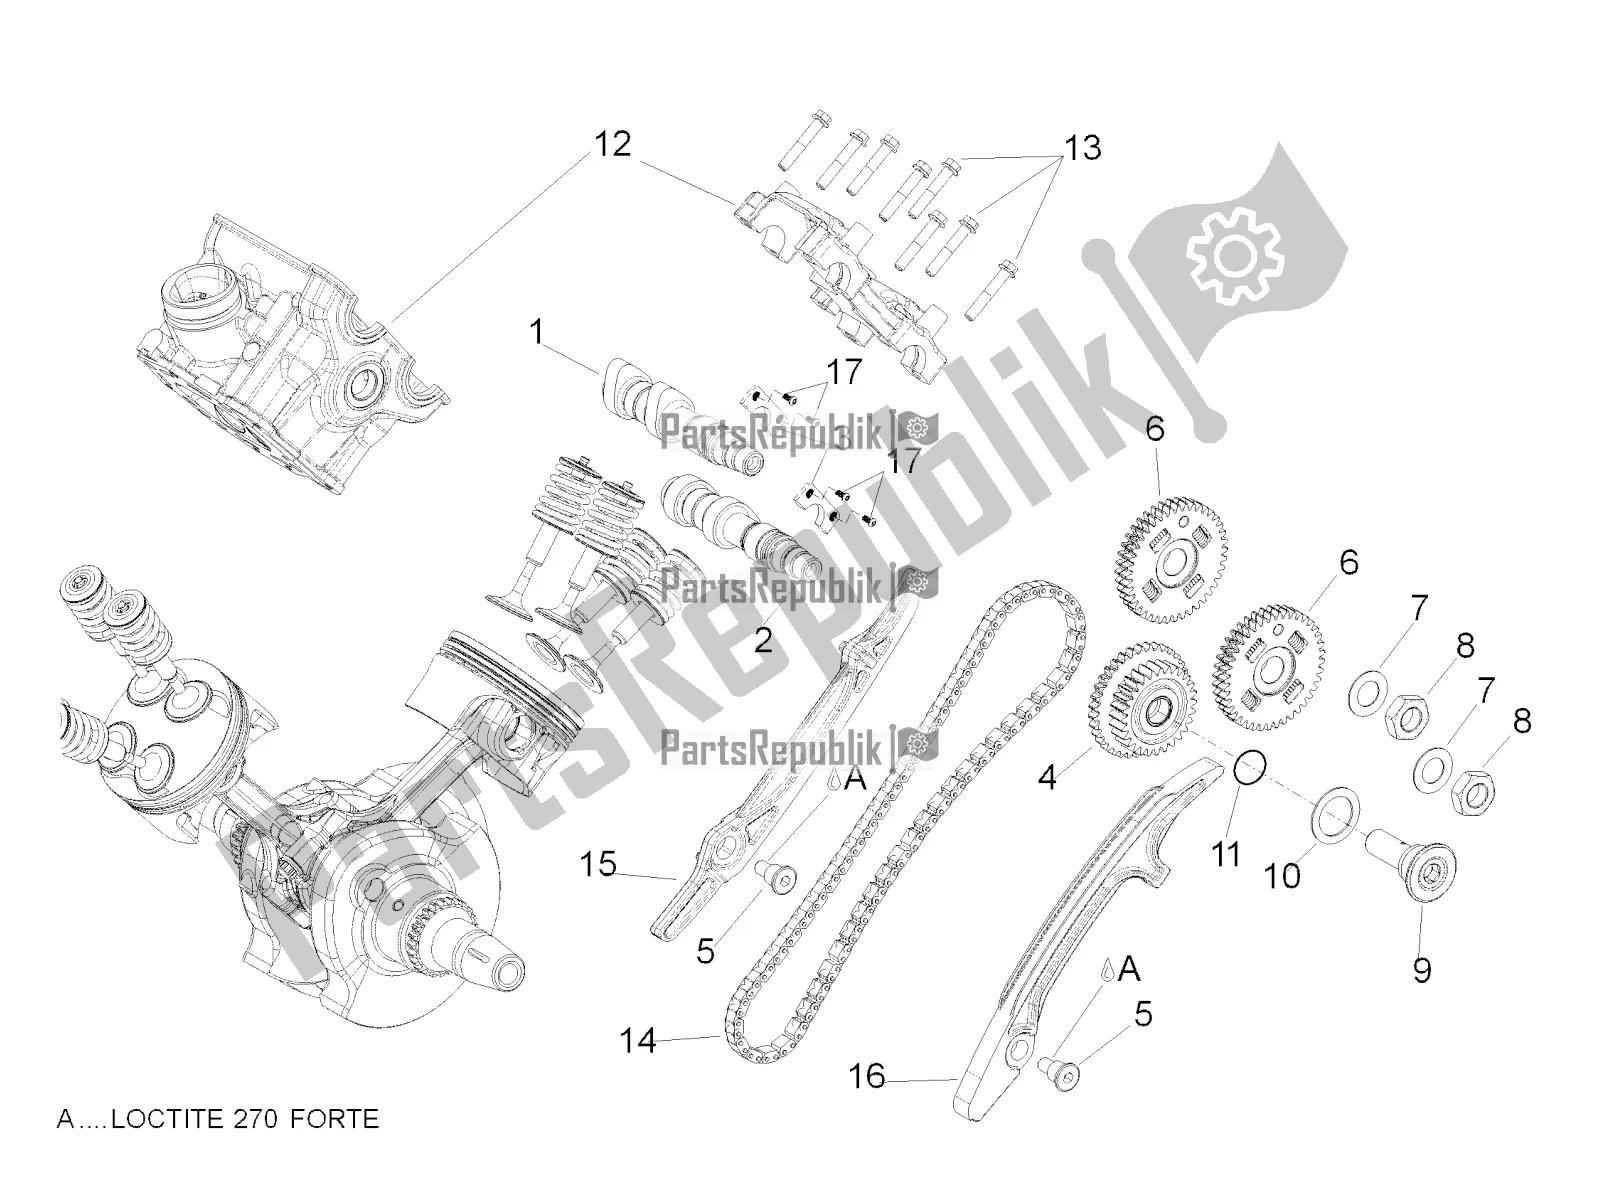 All parts for the Rear Cylinder Timing System of the Aprilia Dorsoduro 750 2016